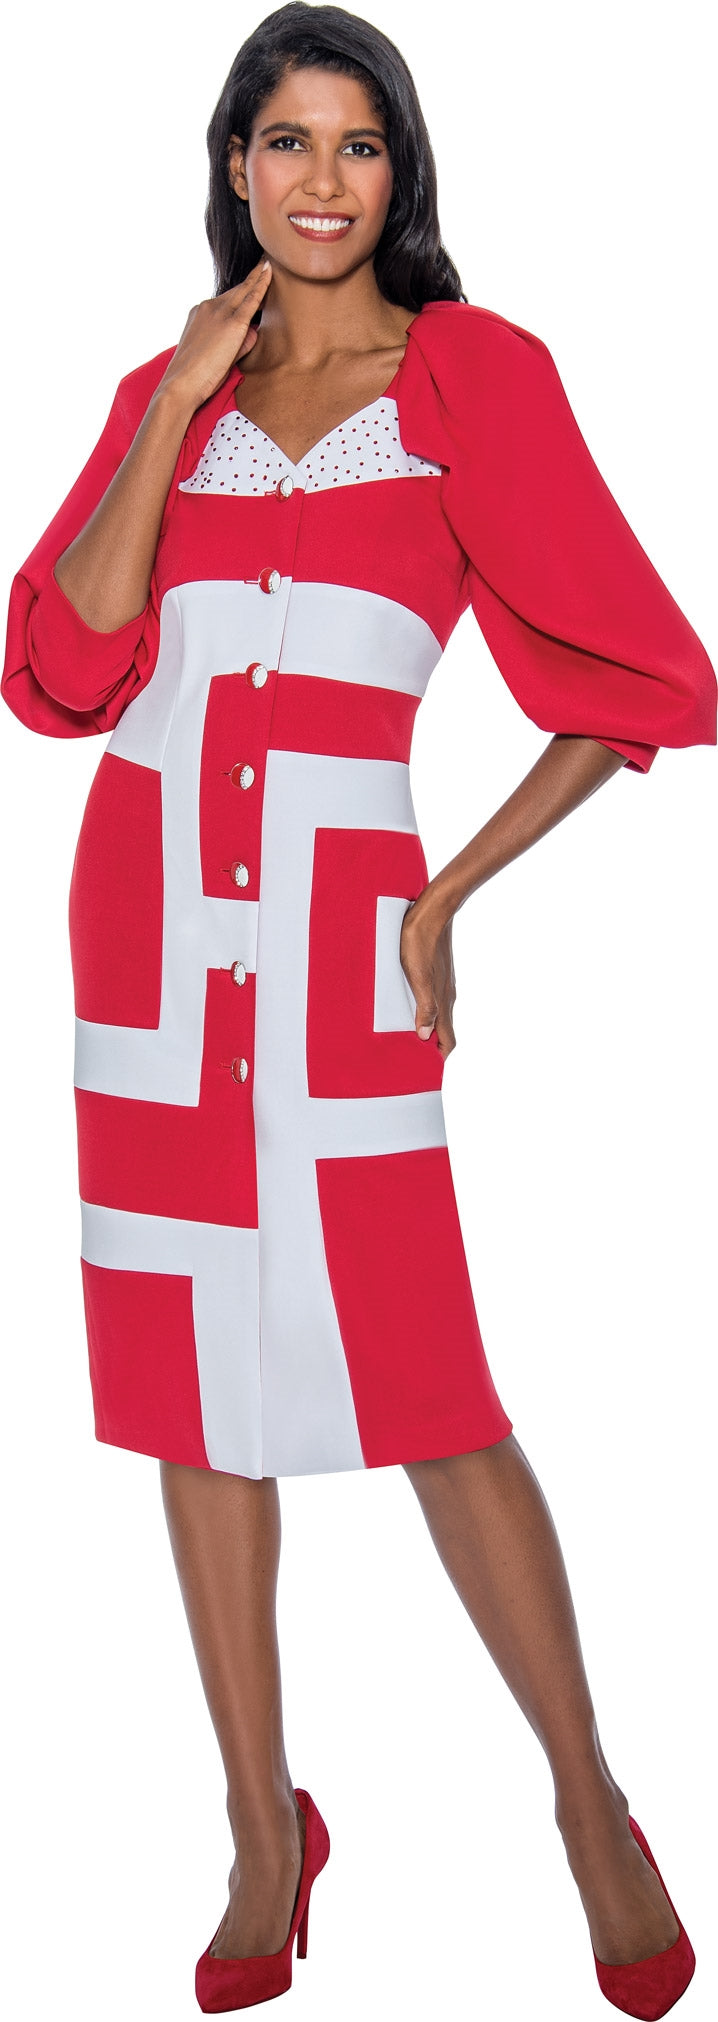 Church Dress By Nubiano 891-Red/White - Church Suits For Less